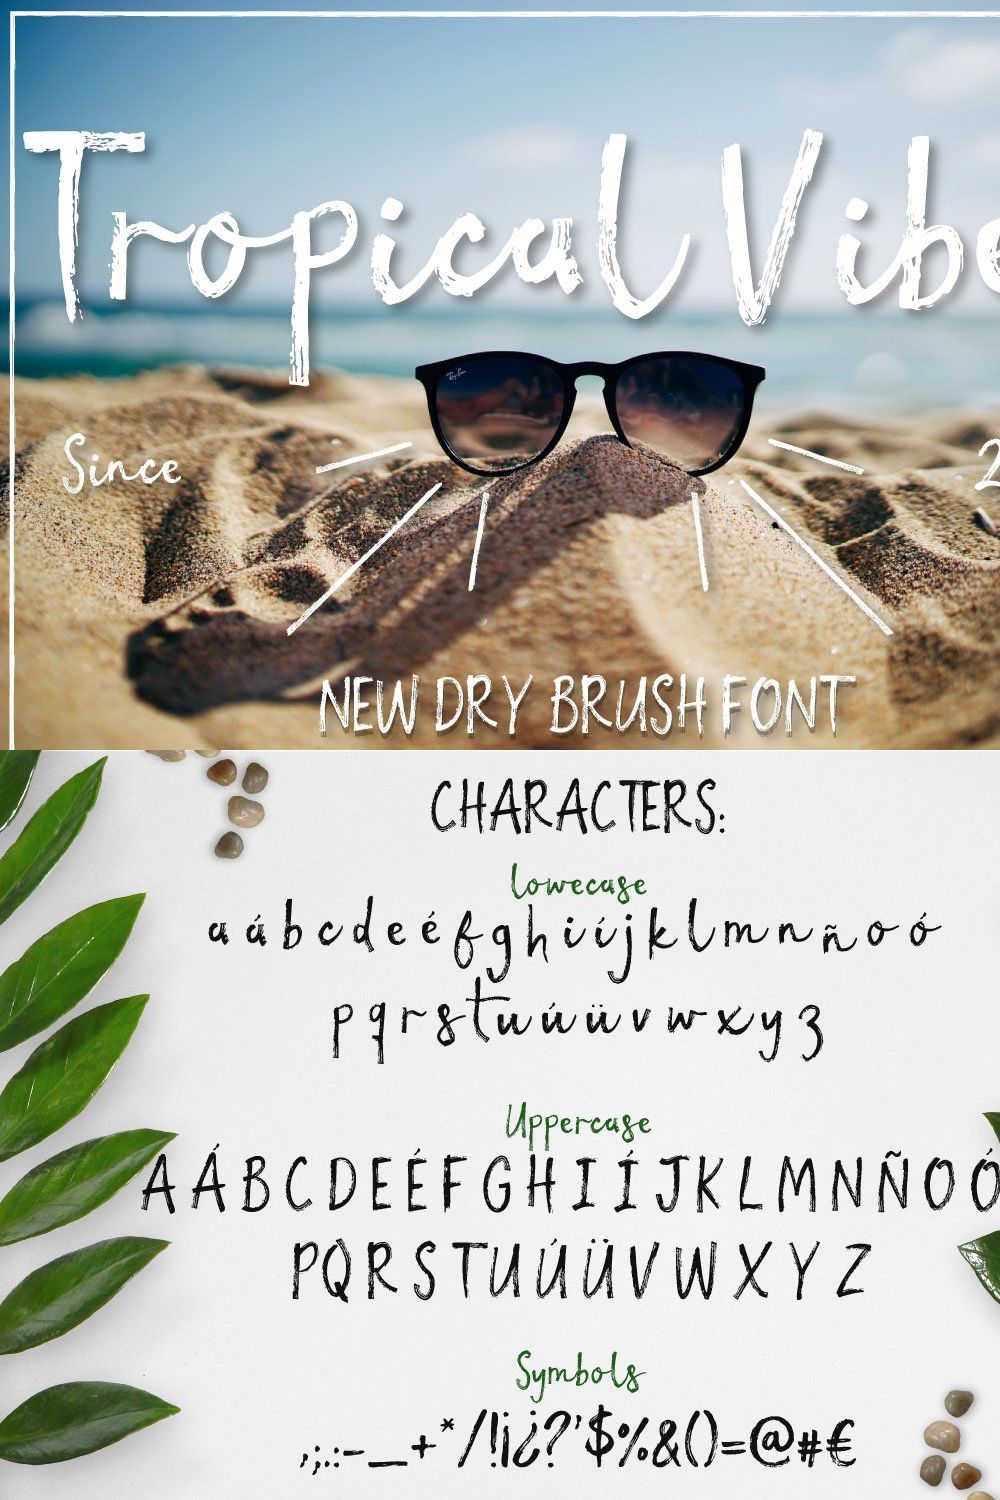 Tropical vibes - Dry brush font pinterest preview image.